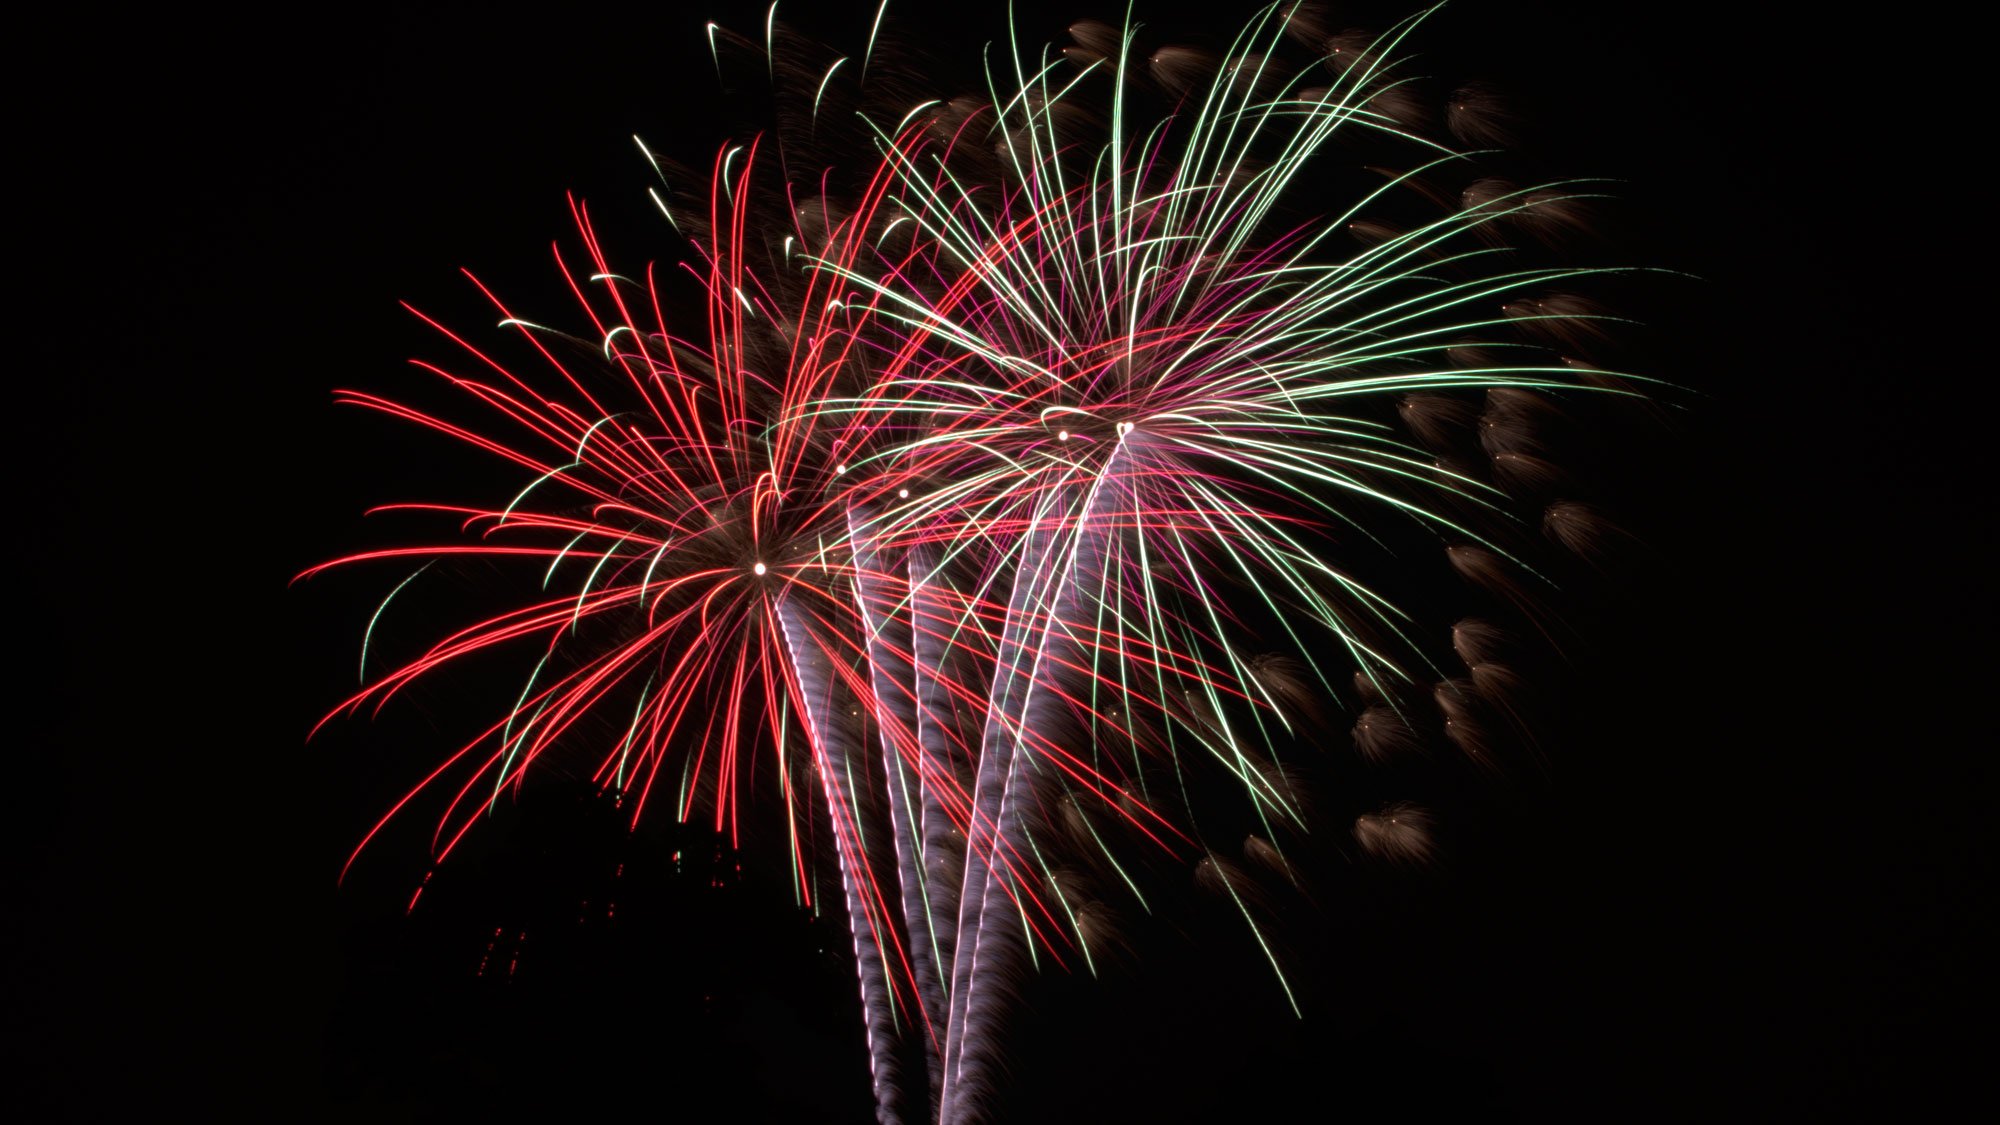 A Complete Guide to Photographing Fireworks